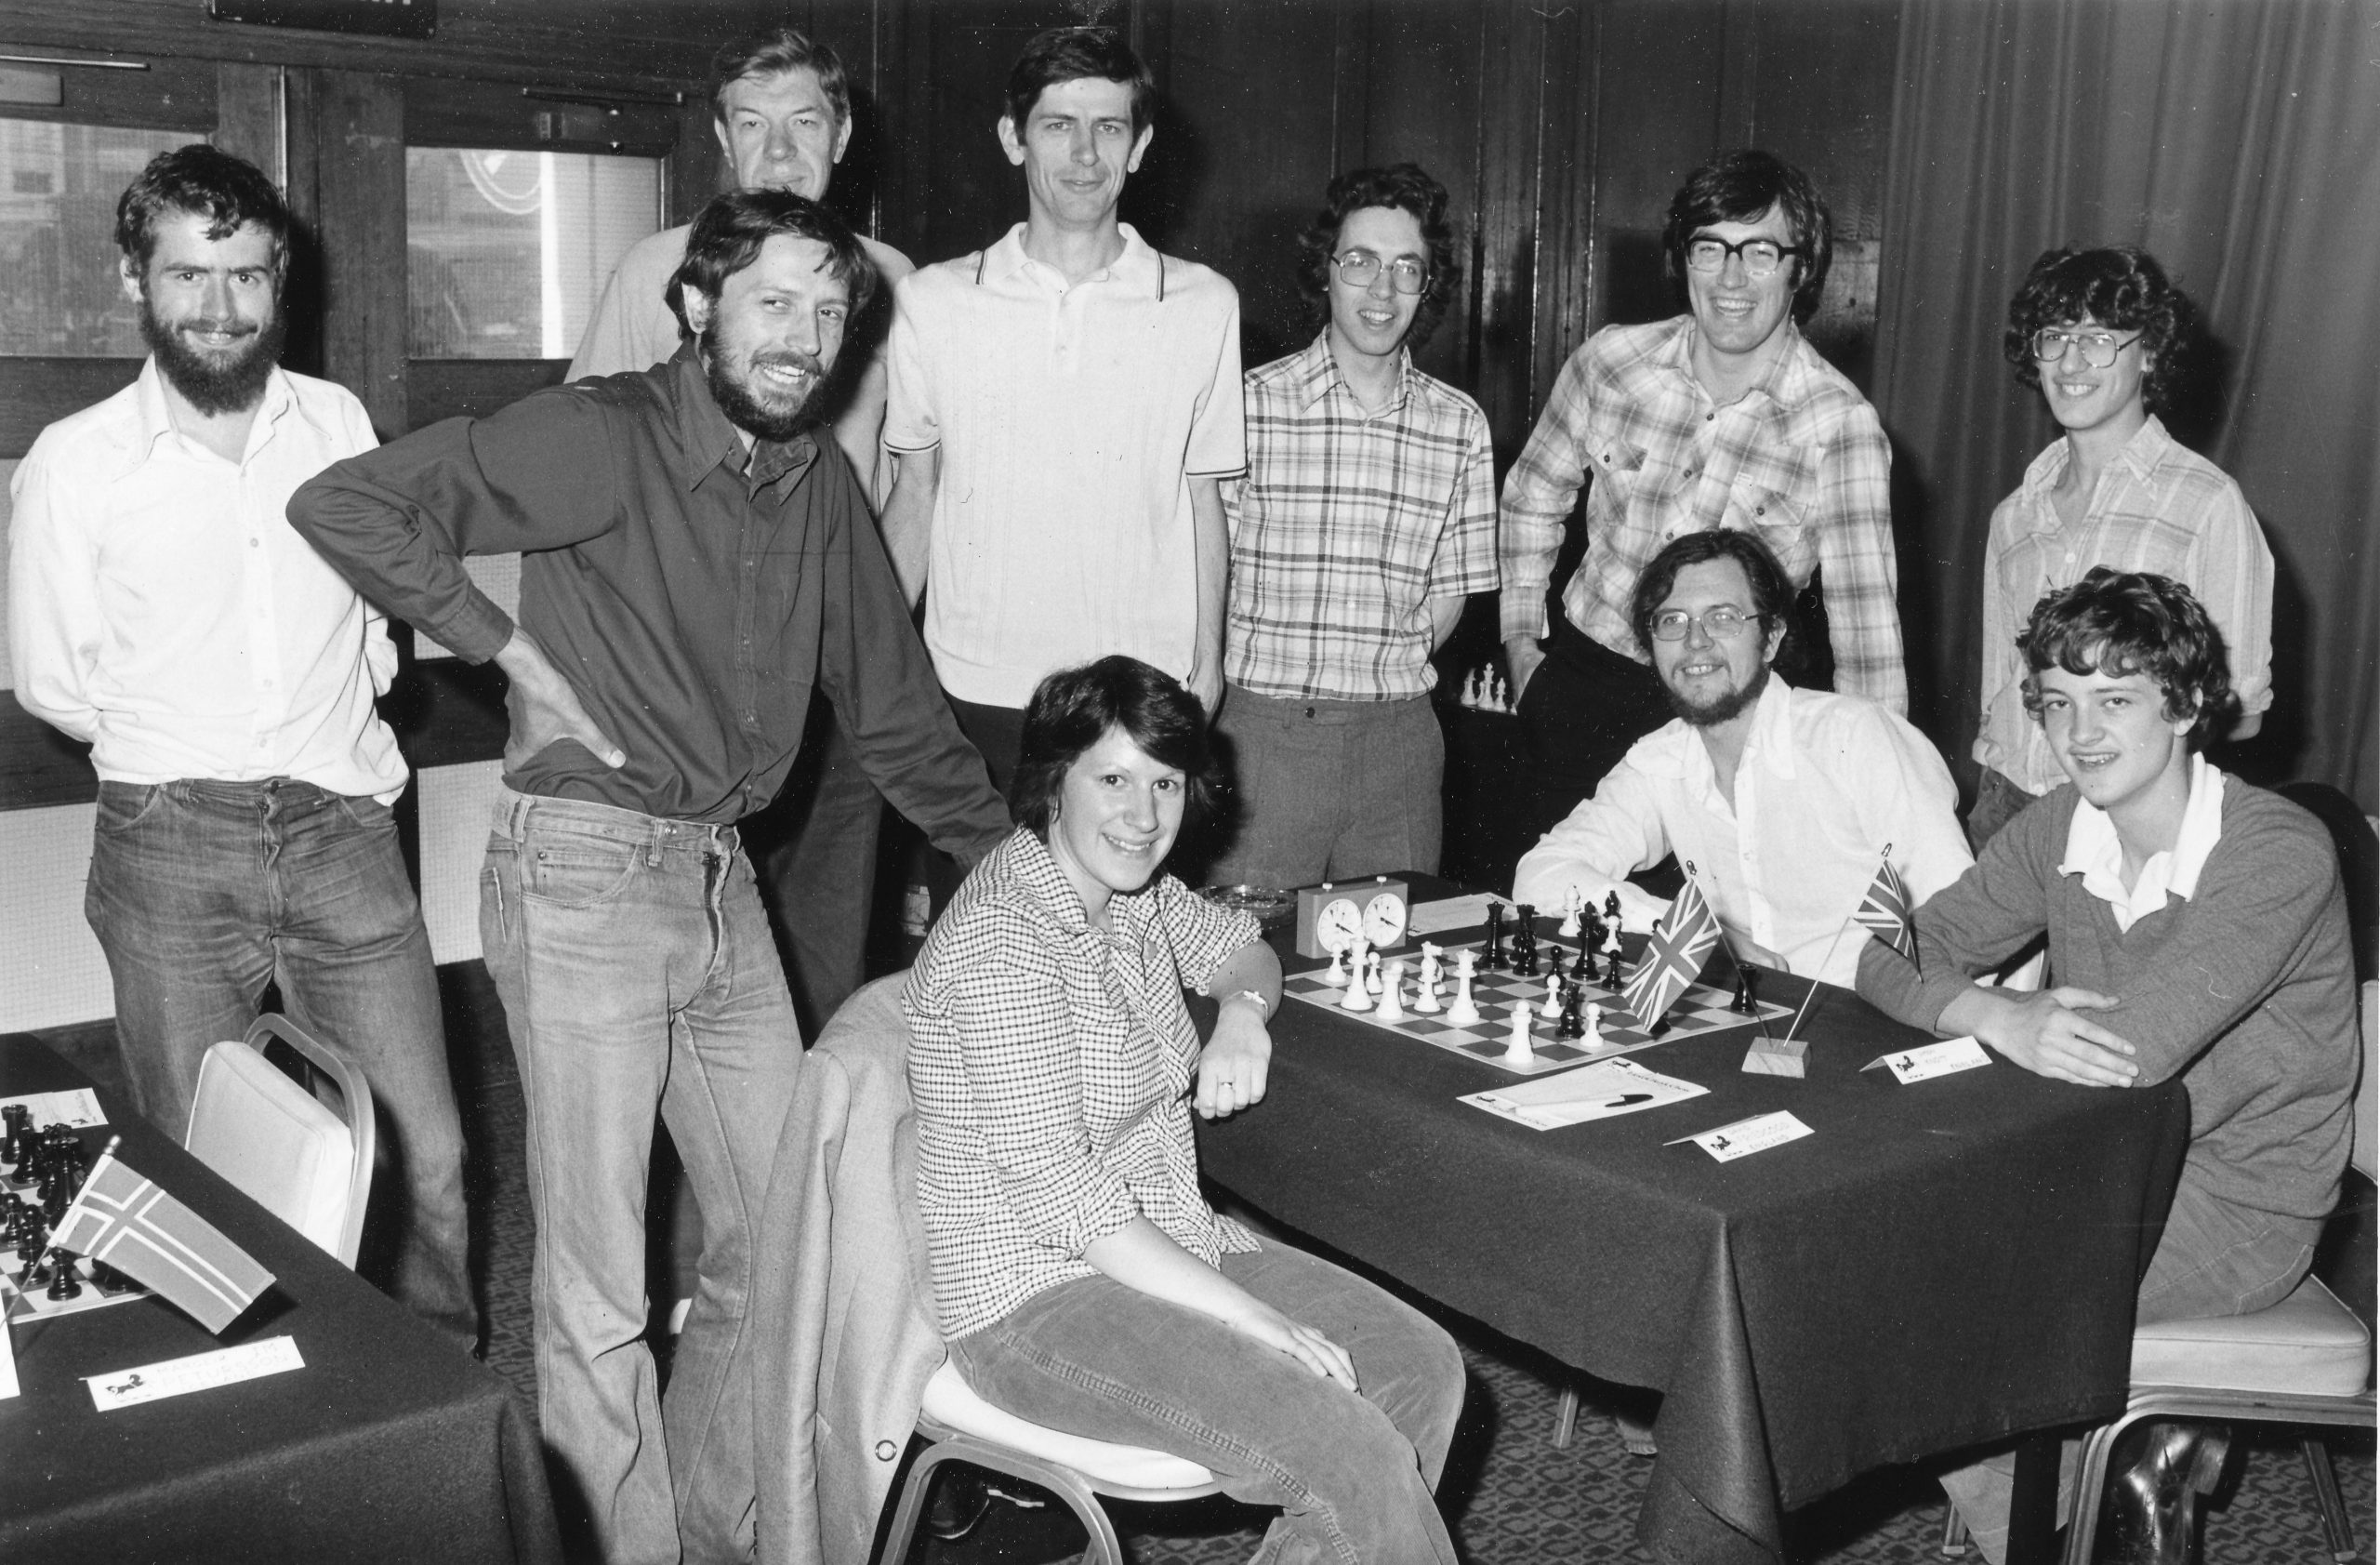 Shaun Taulbut and friends during the 1978 Lloyds Bank Masters